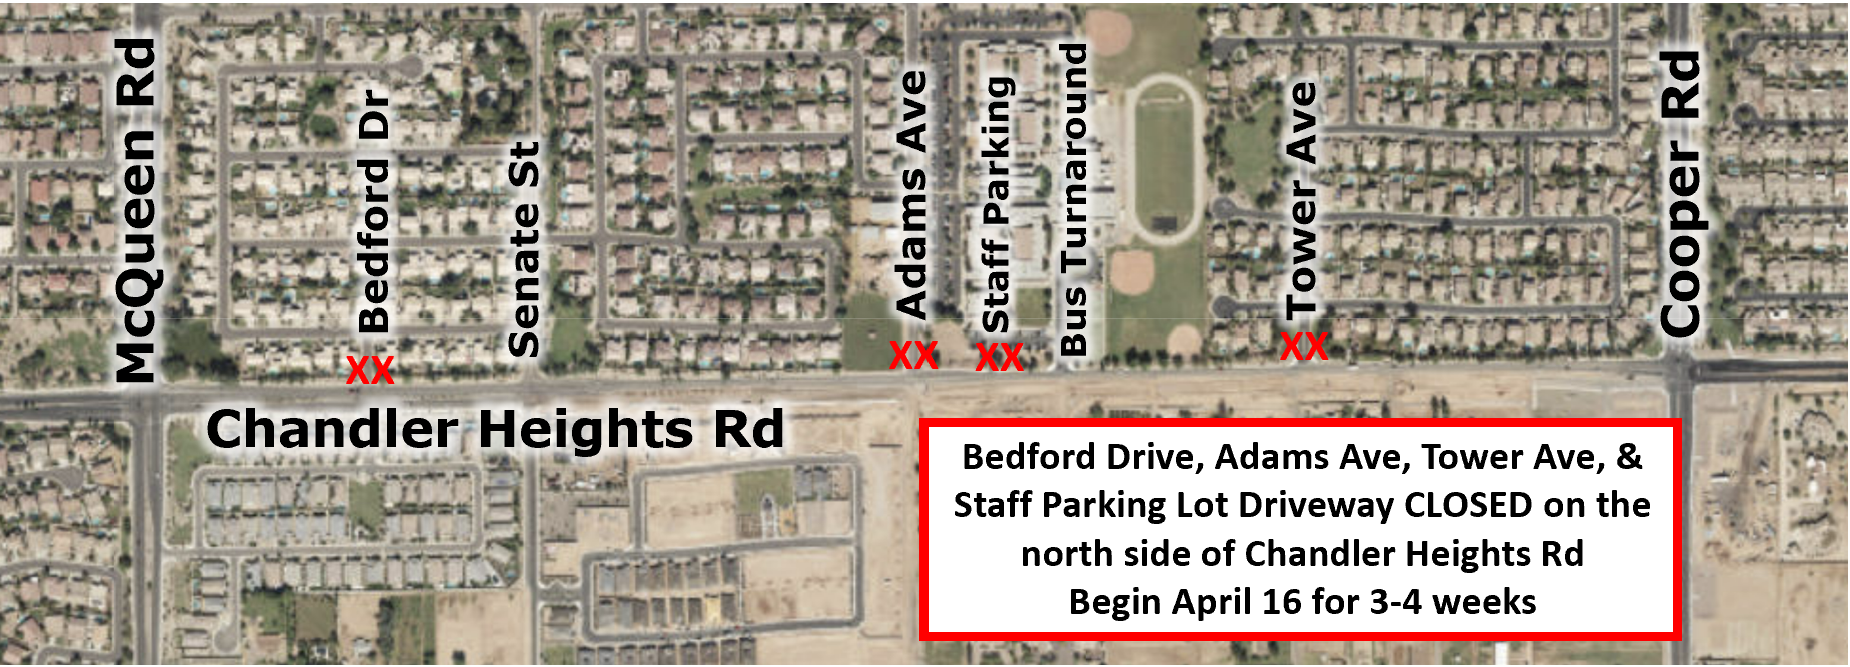 Chandler Heights Road Closures UPDATED